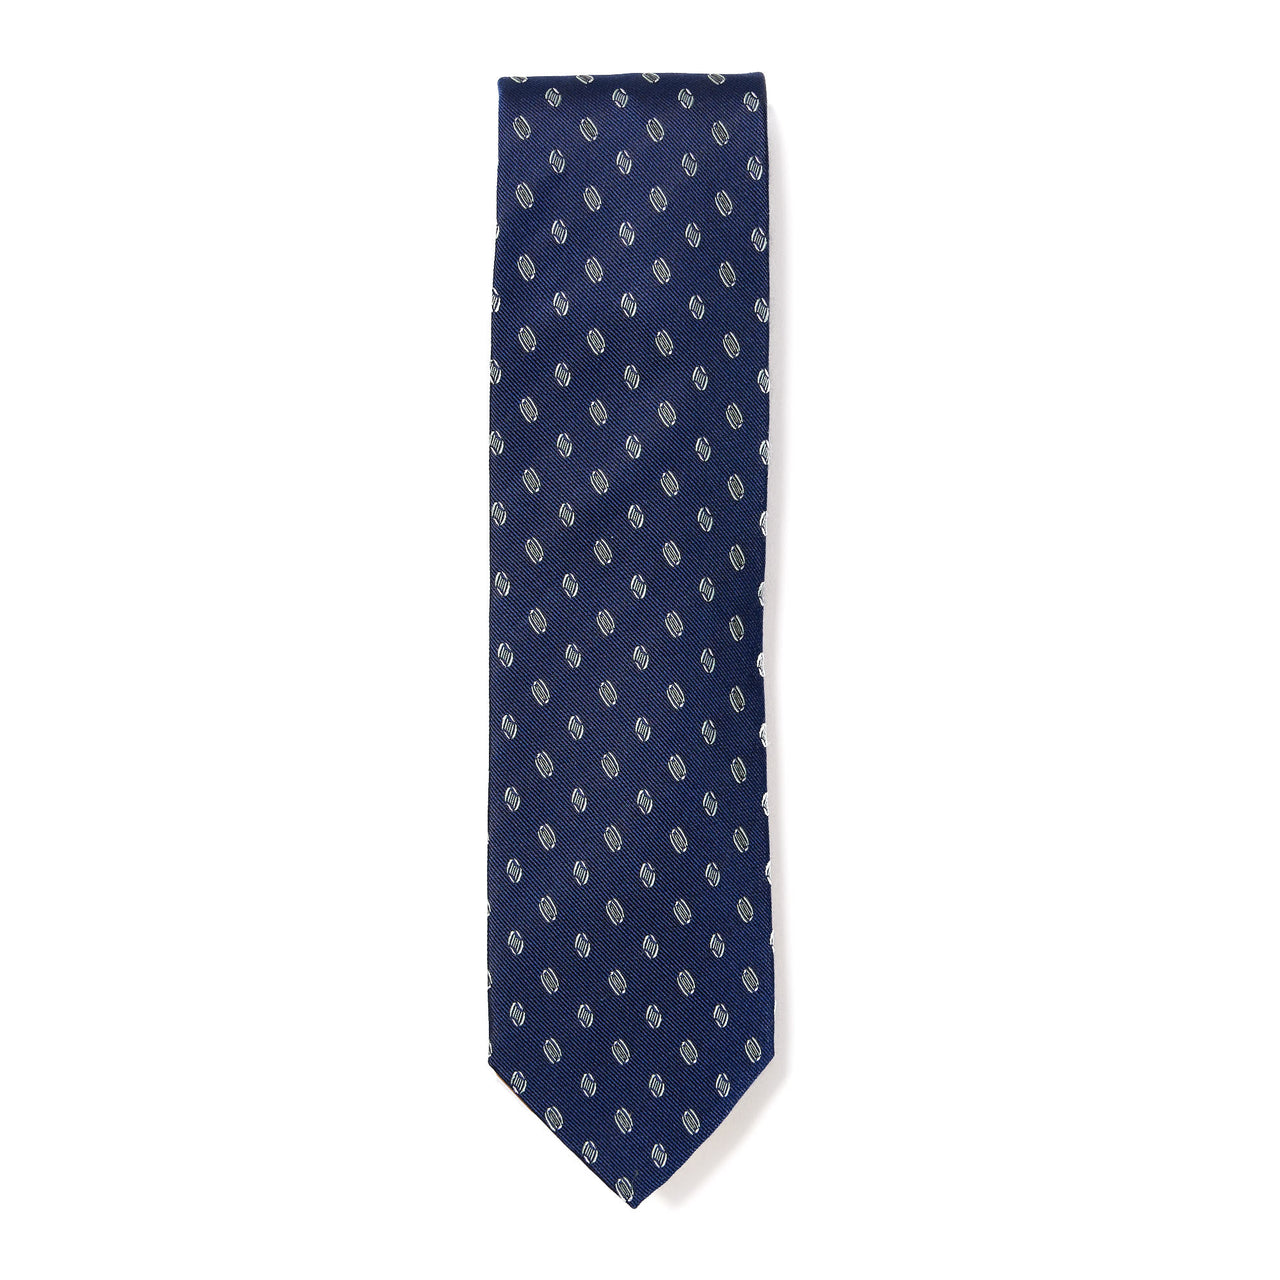 HENRY SARTORIAL X CANTINI Woven Silk Tie NAVY/WHITE